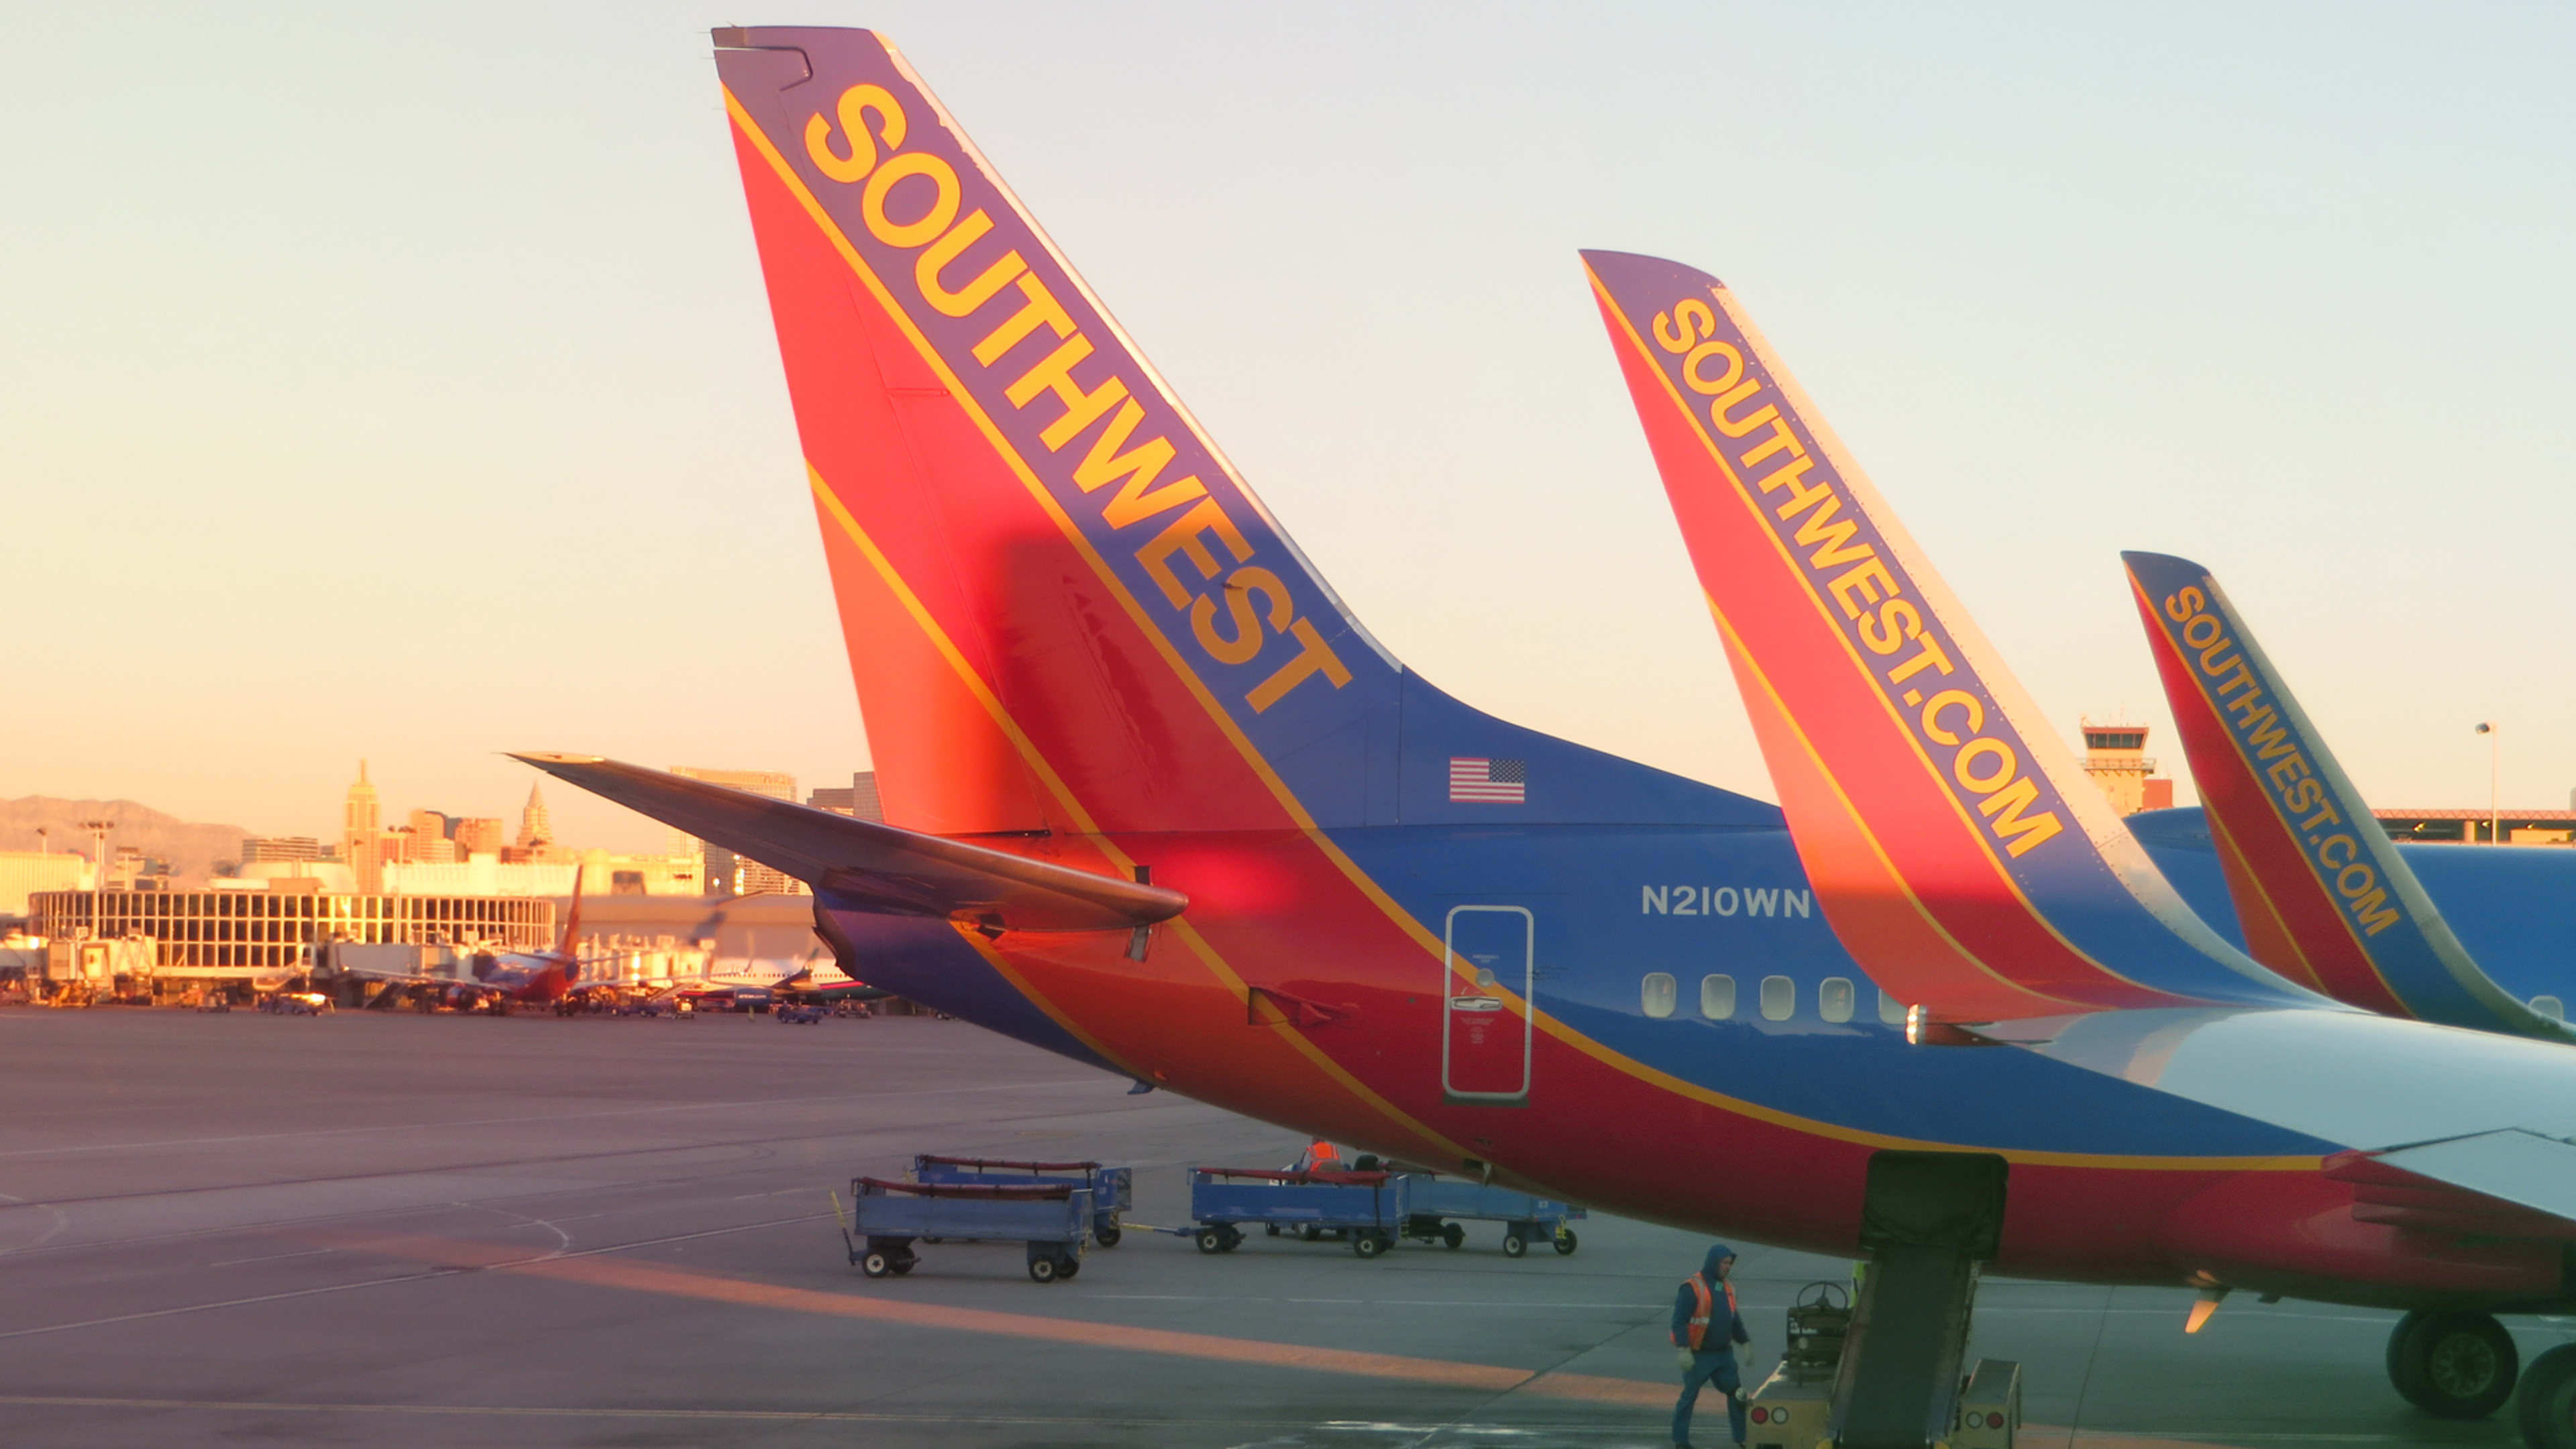 Southwest Airlines employees accused of having a “whites-only” break room in lawsuit